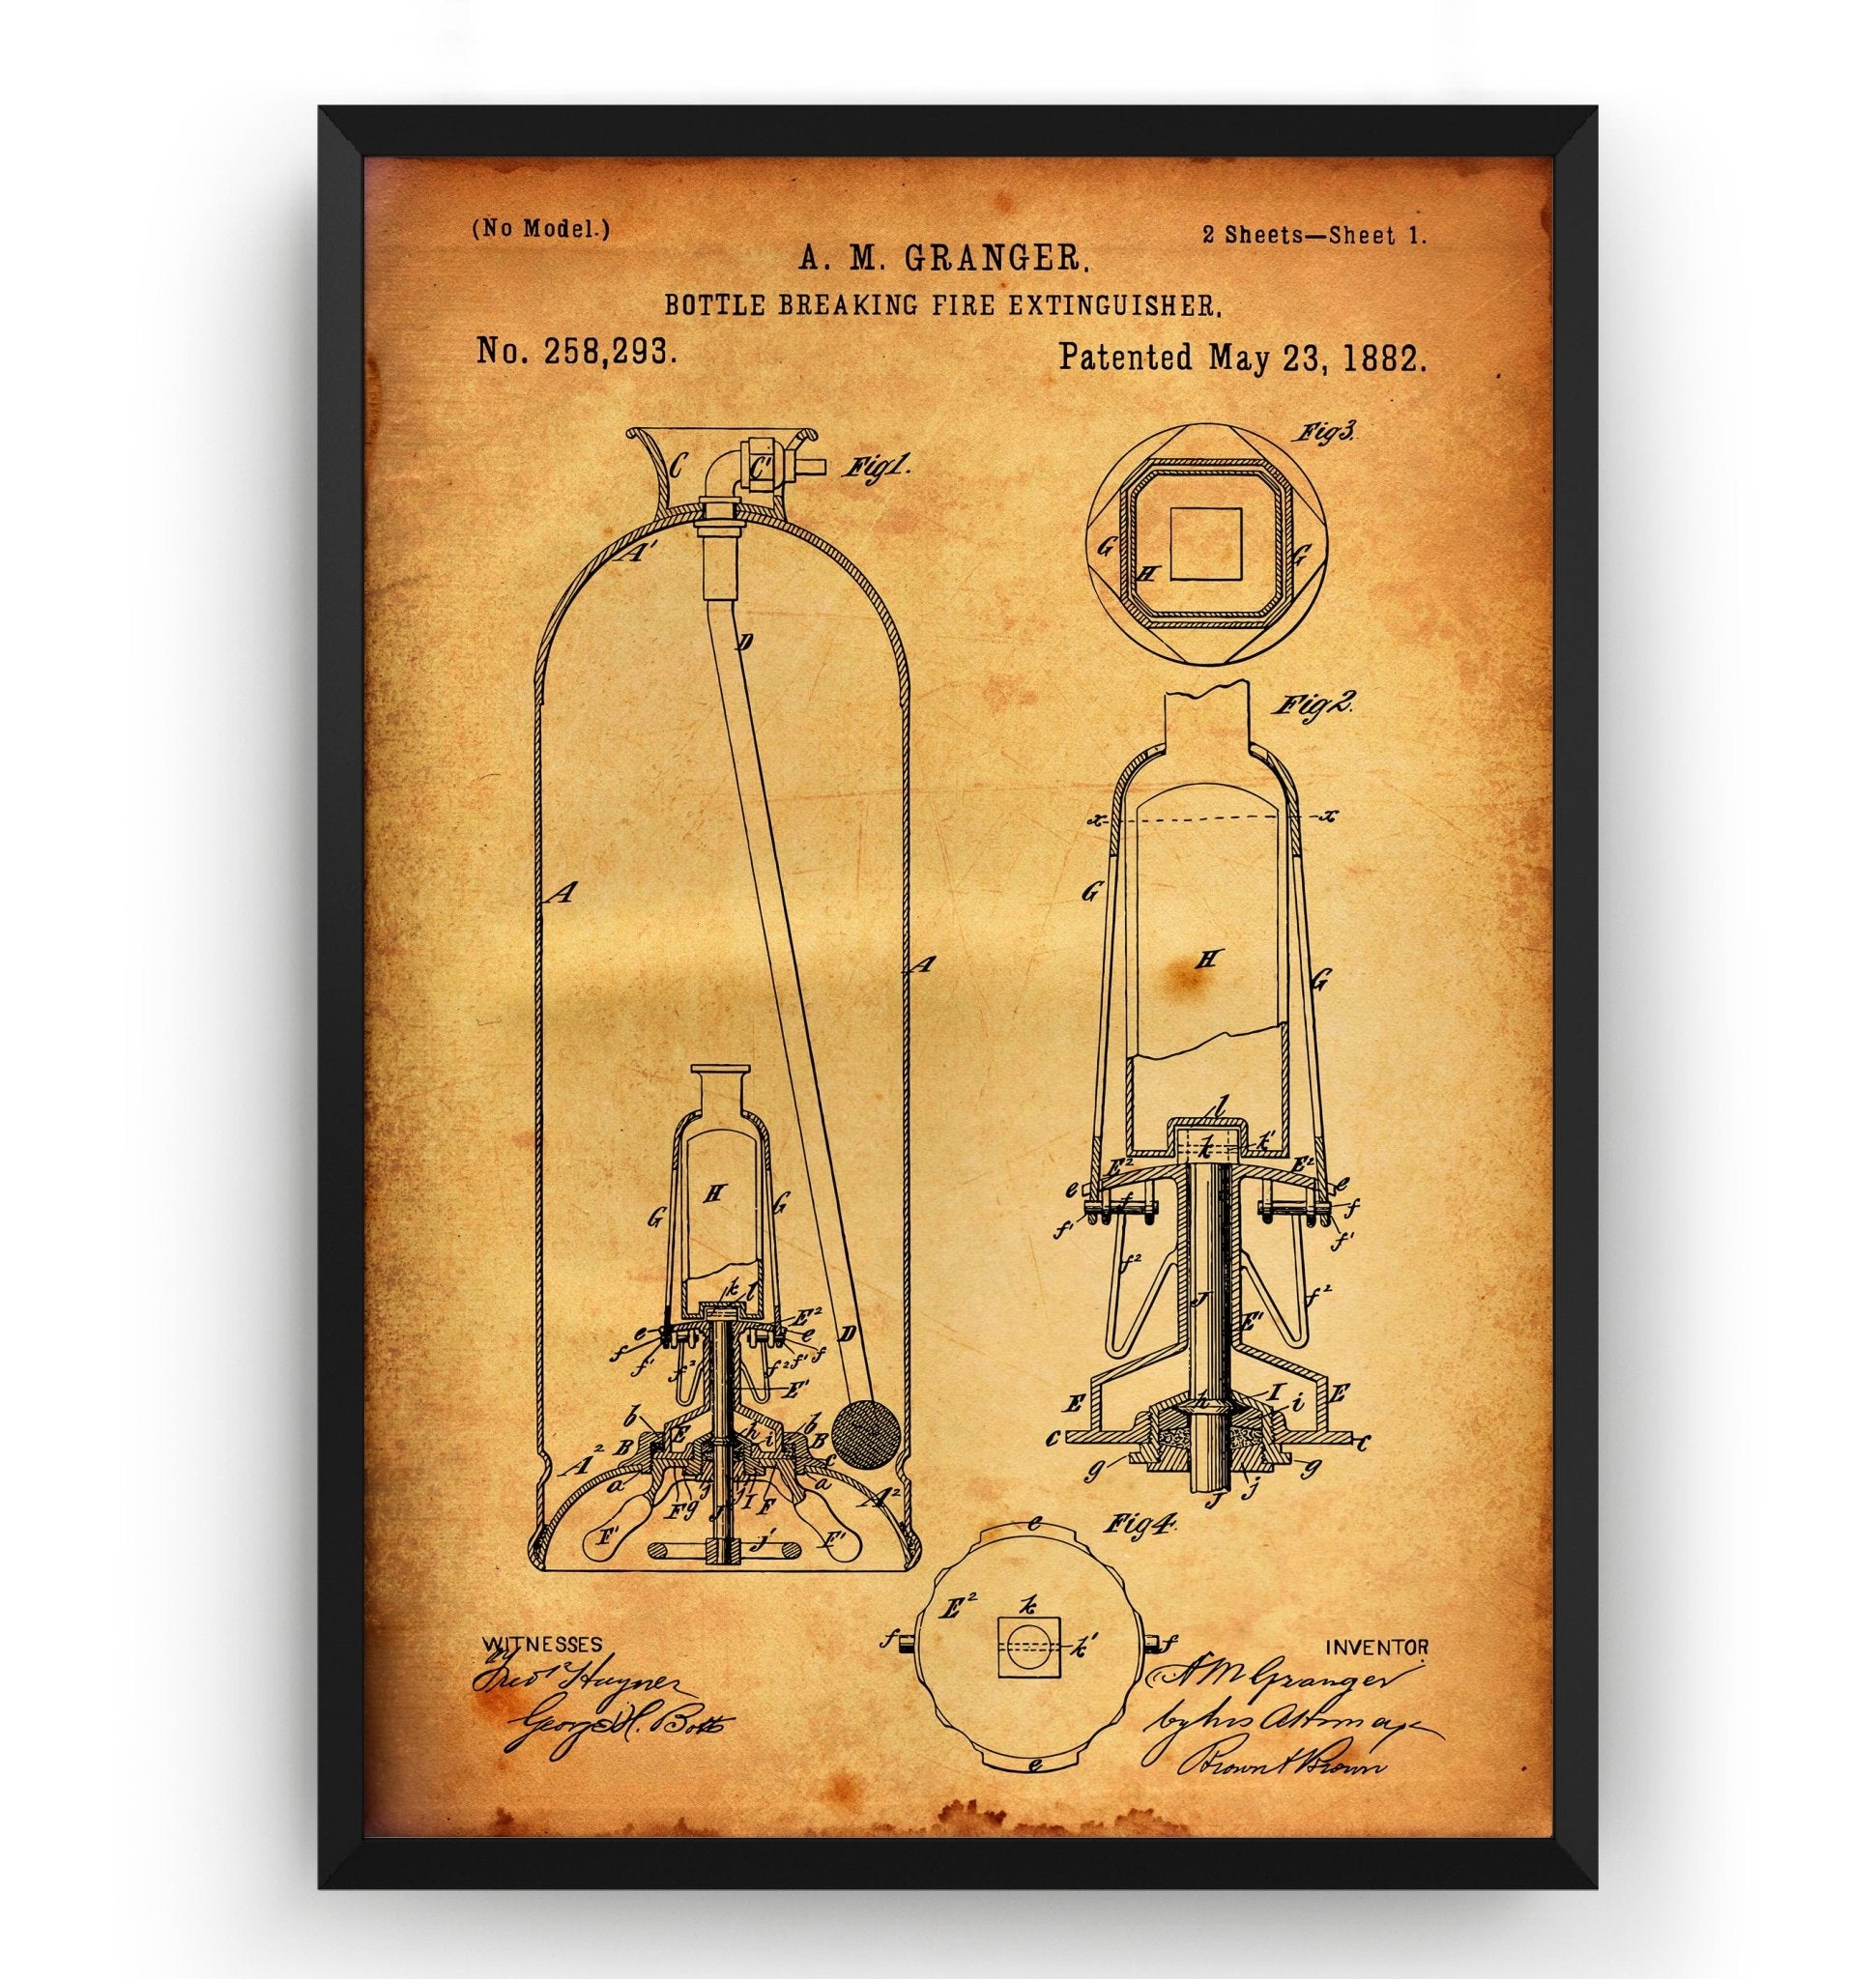 Bottle Breaking Fire Extinguisher 1882 Patent Print - Magic Posters